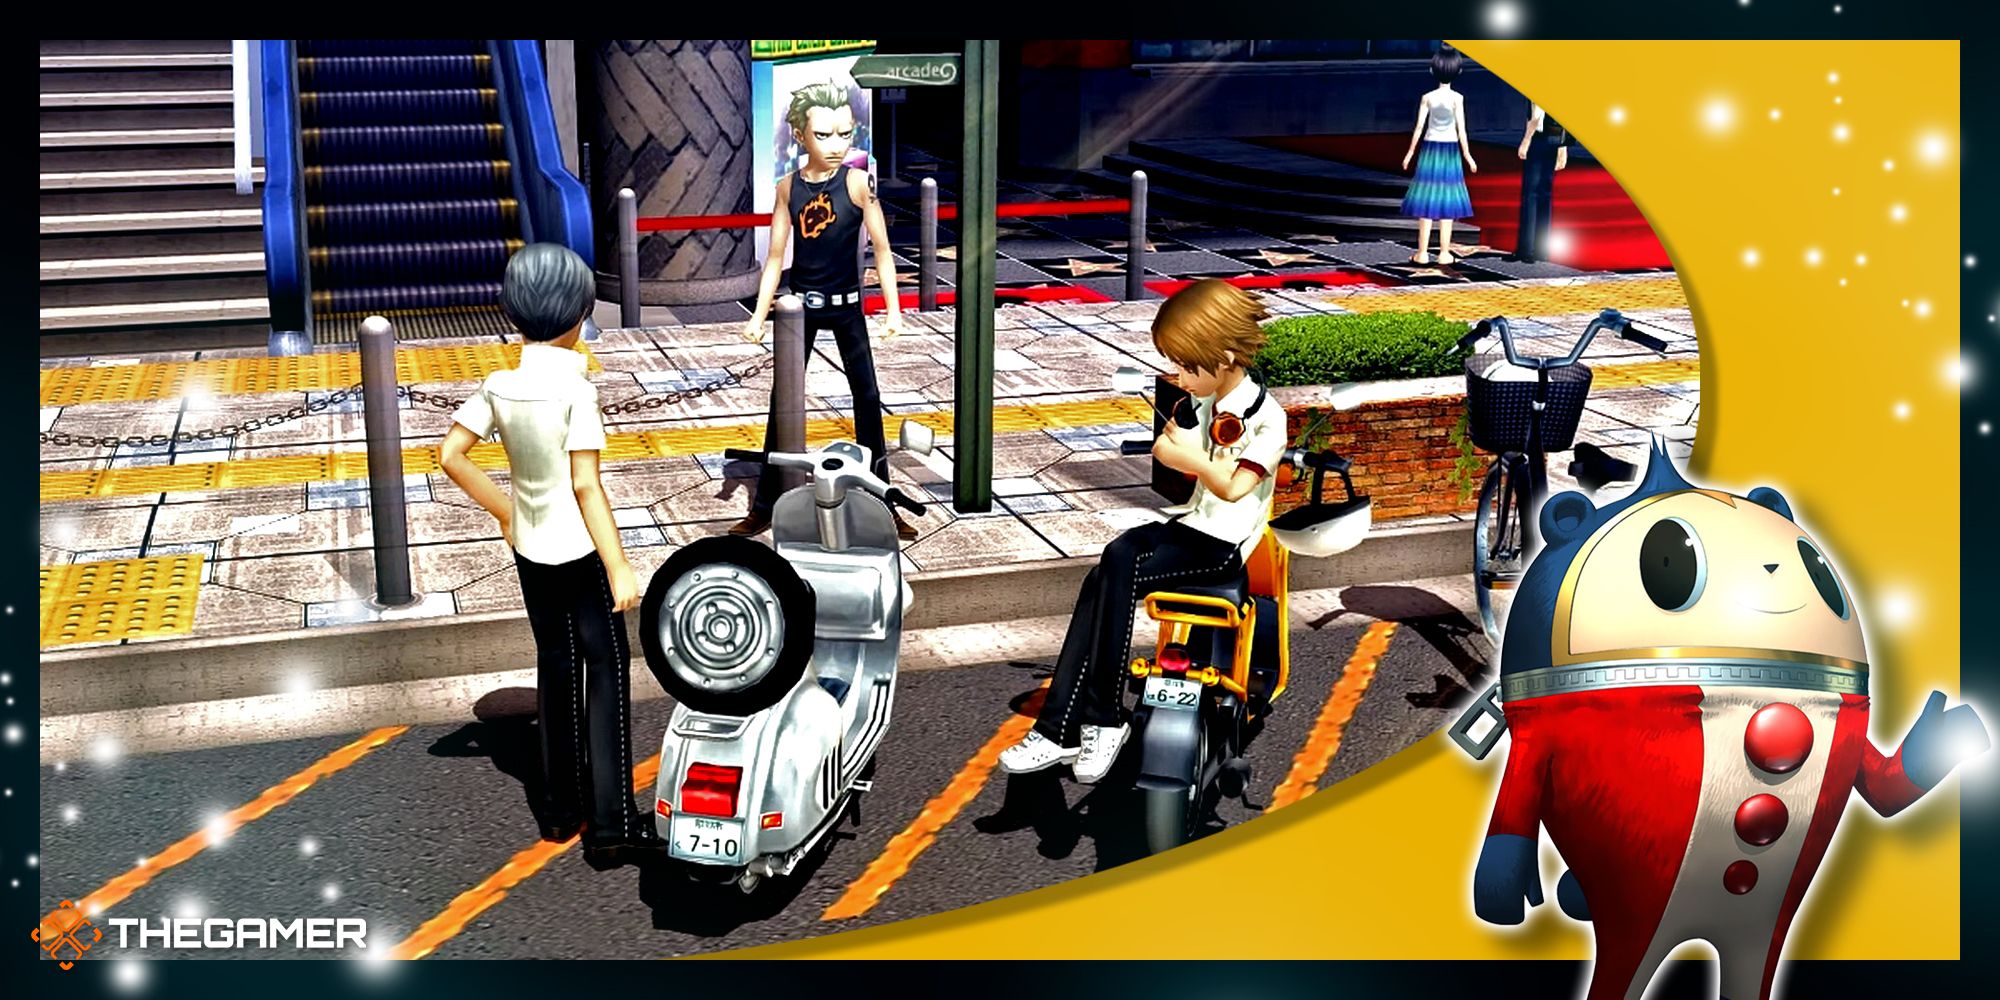 Persona 4 Golden - Yu, Kanji, and Yosuke on their scooters, with Teddie in the foreground.